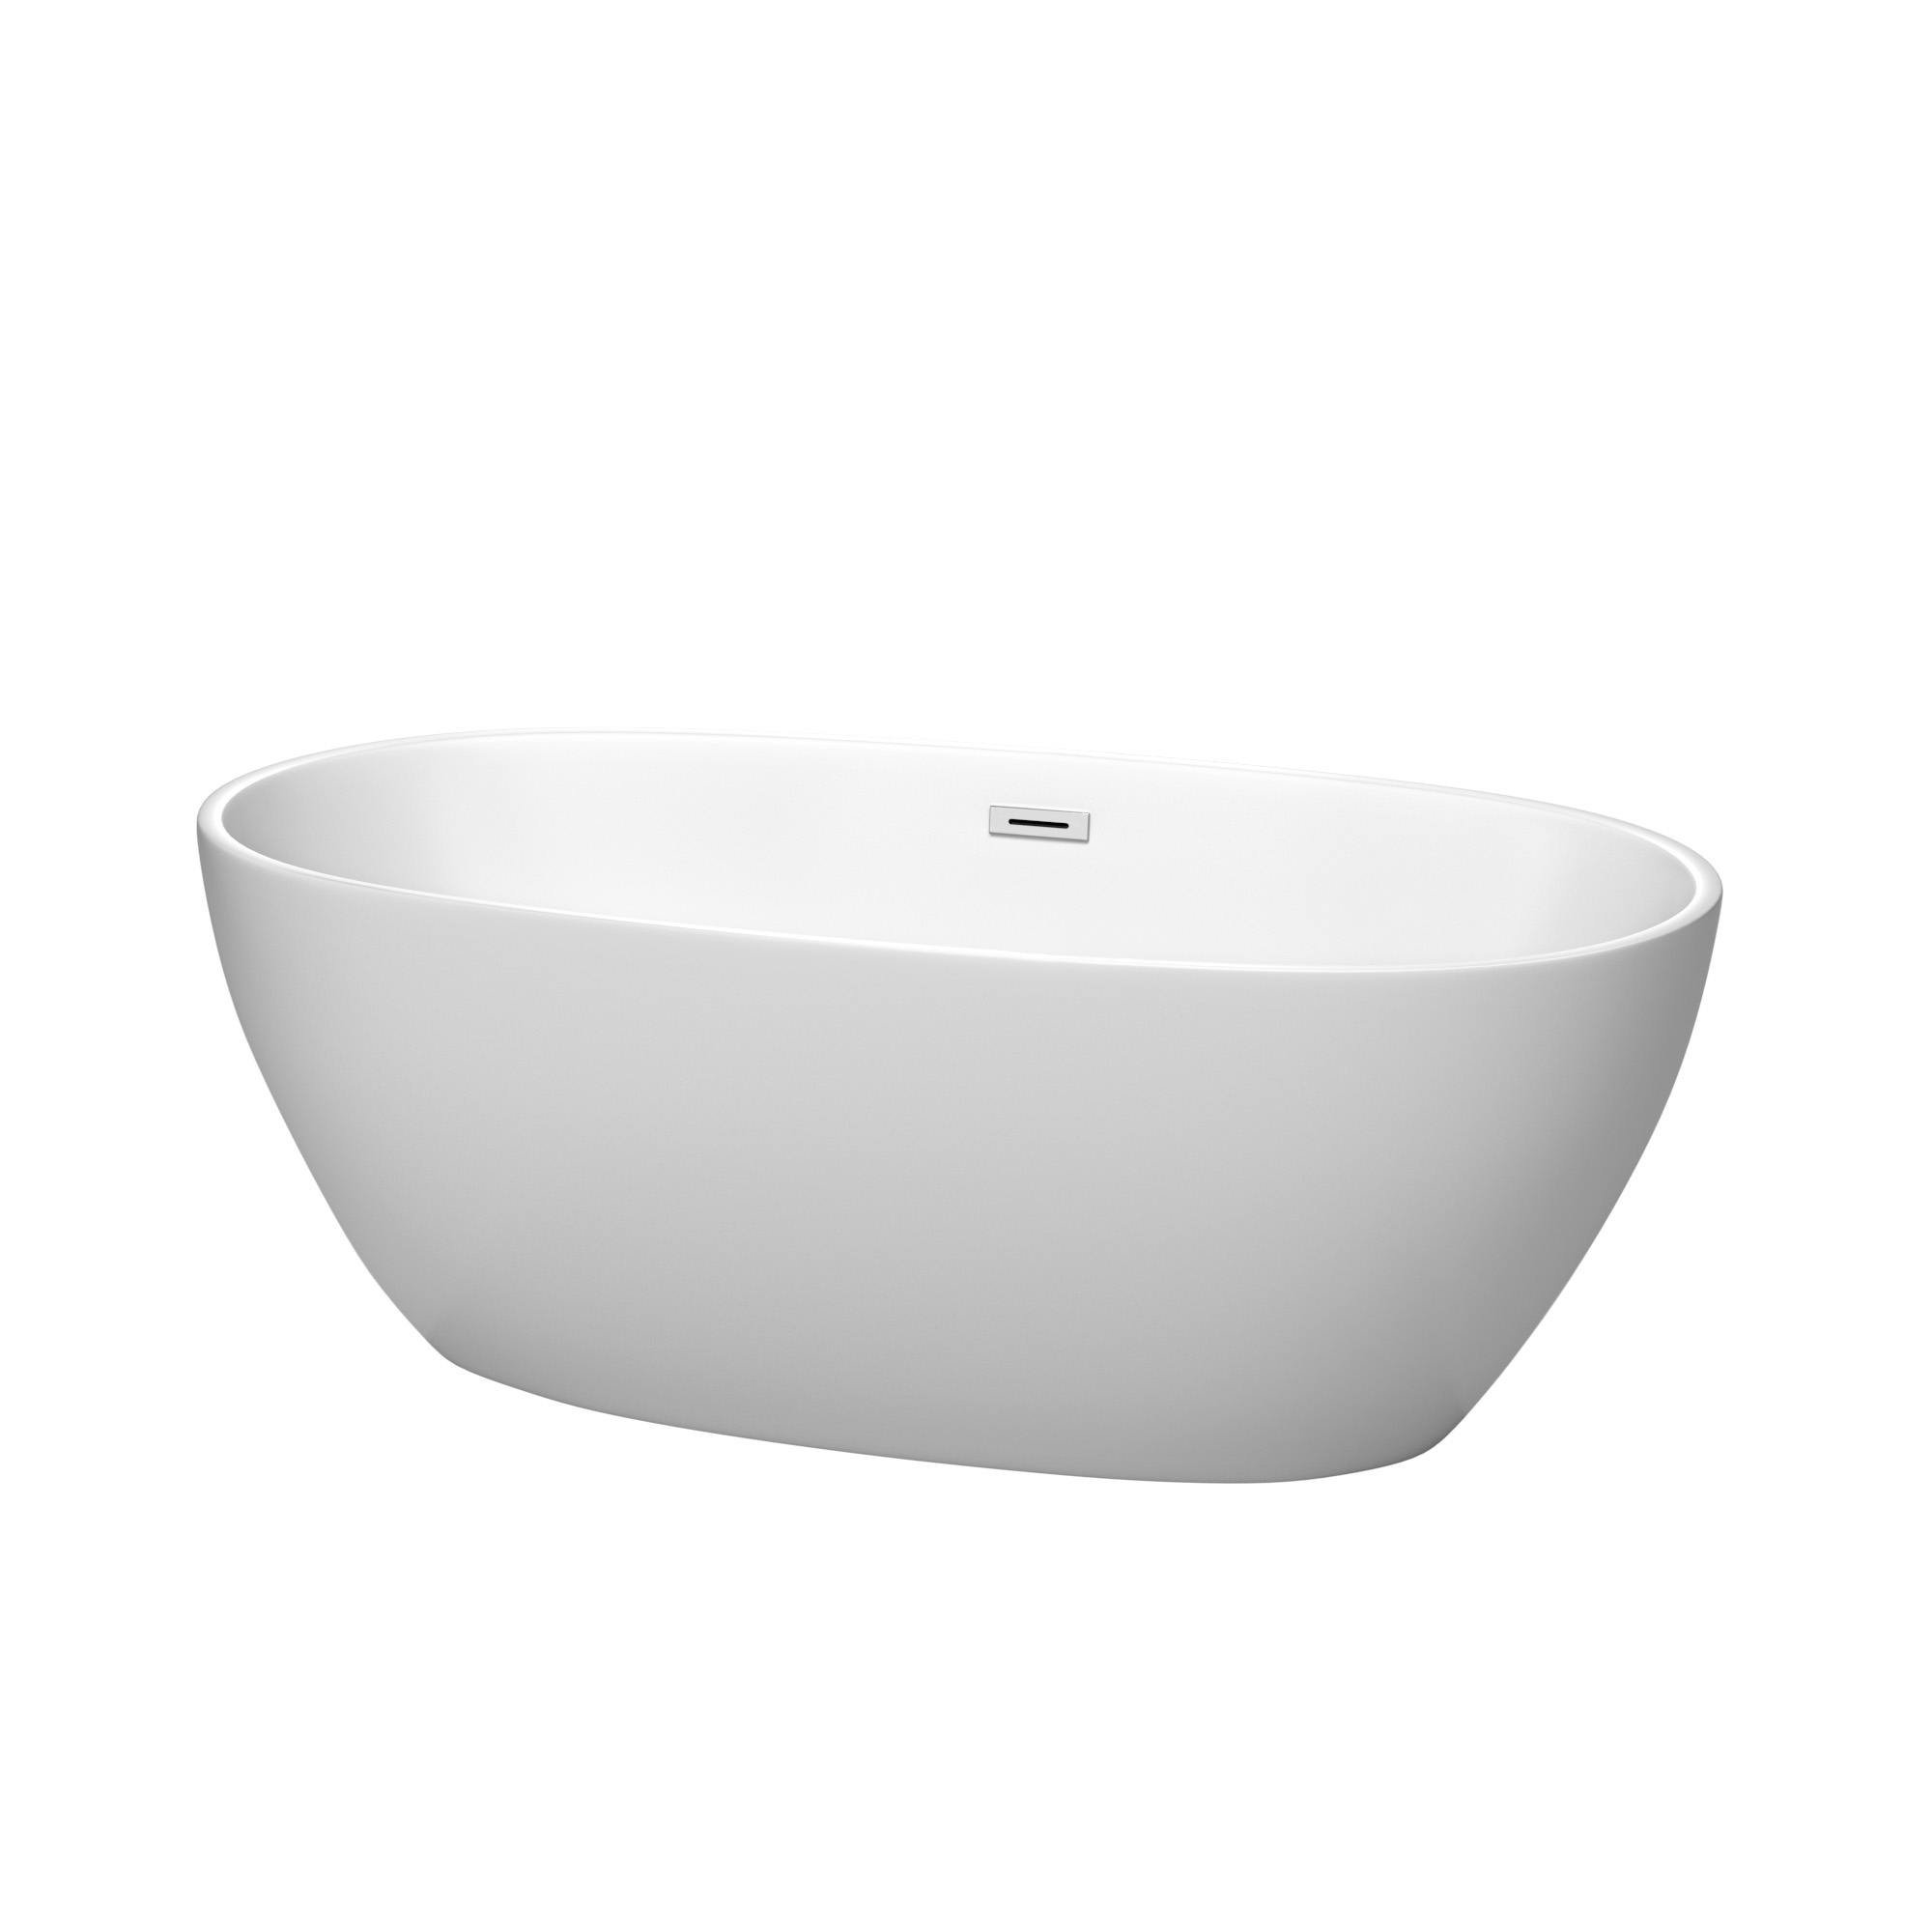 63" Freestanding Bathtub in Matte White with Polished Chrome Drain and Overflow Trim